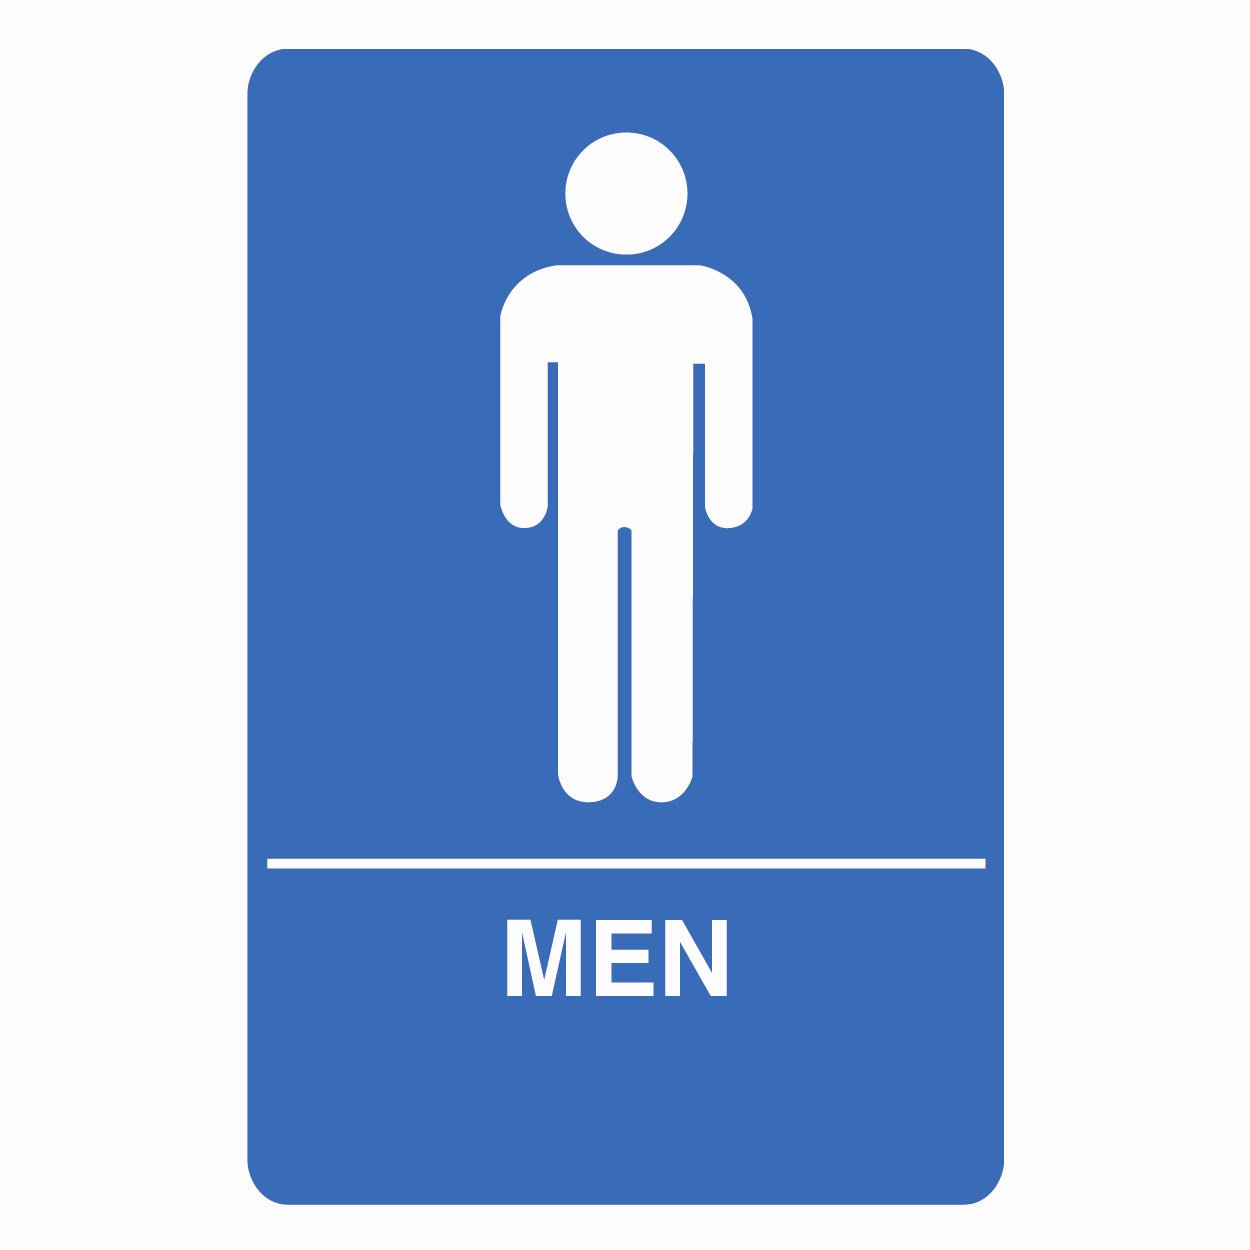 Mens Restroom Sign Images  Pictures - Becuo